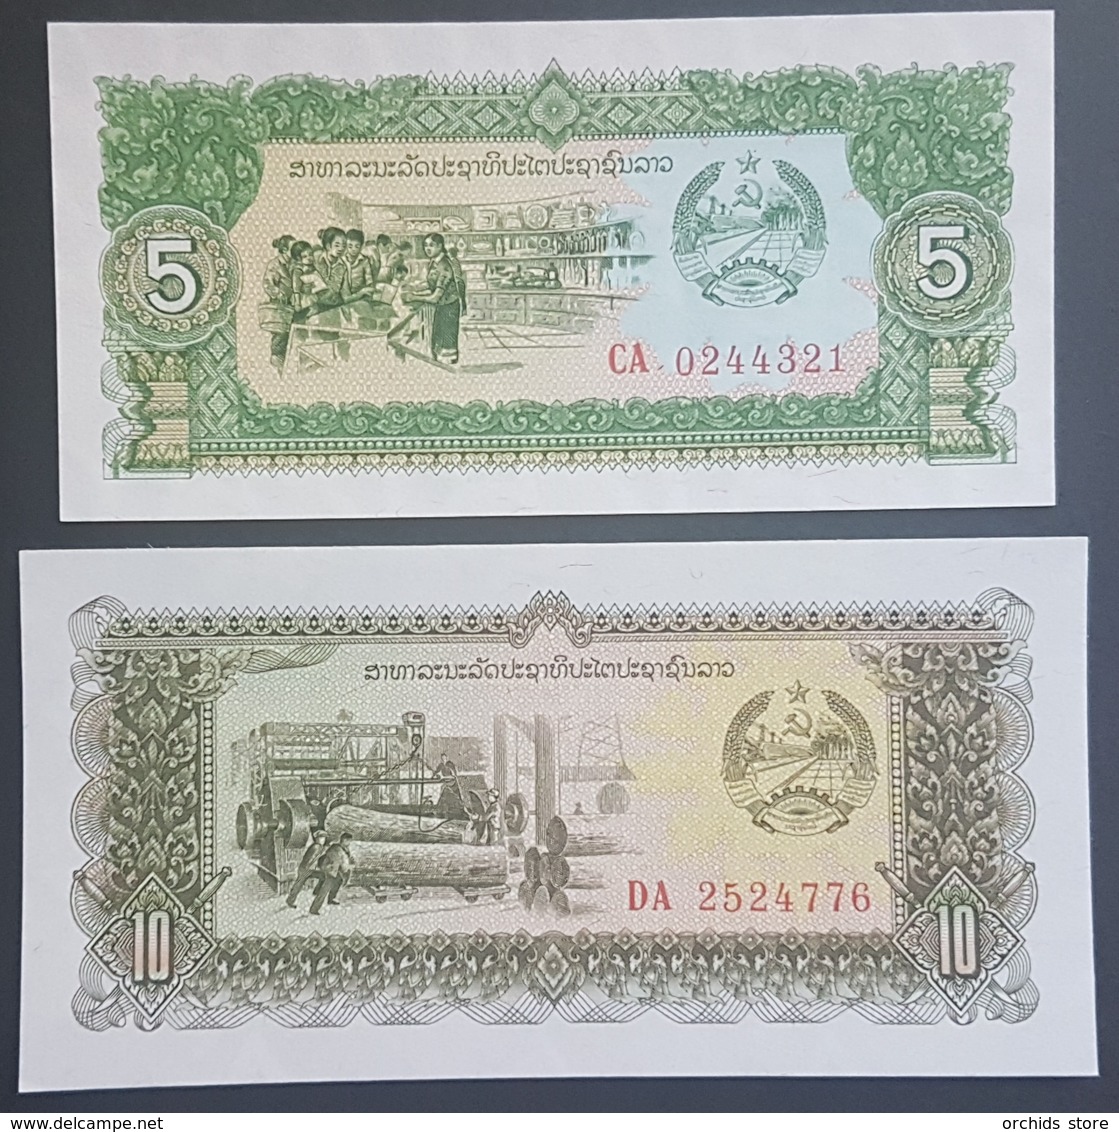 E11g2 - Laos 2 Banknotes, 1988 Issue, 5-10 Kip Both Replacement Notes P26r-27r, RRR, All UNC - Laos